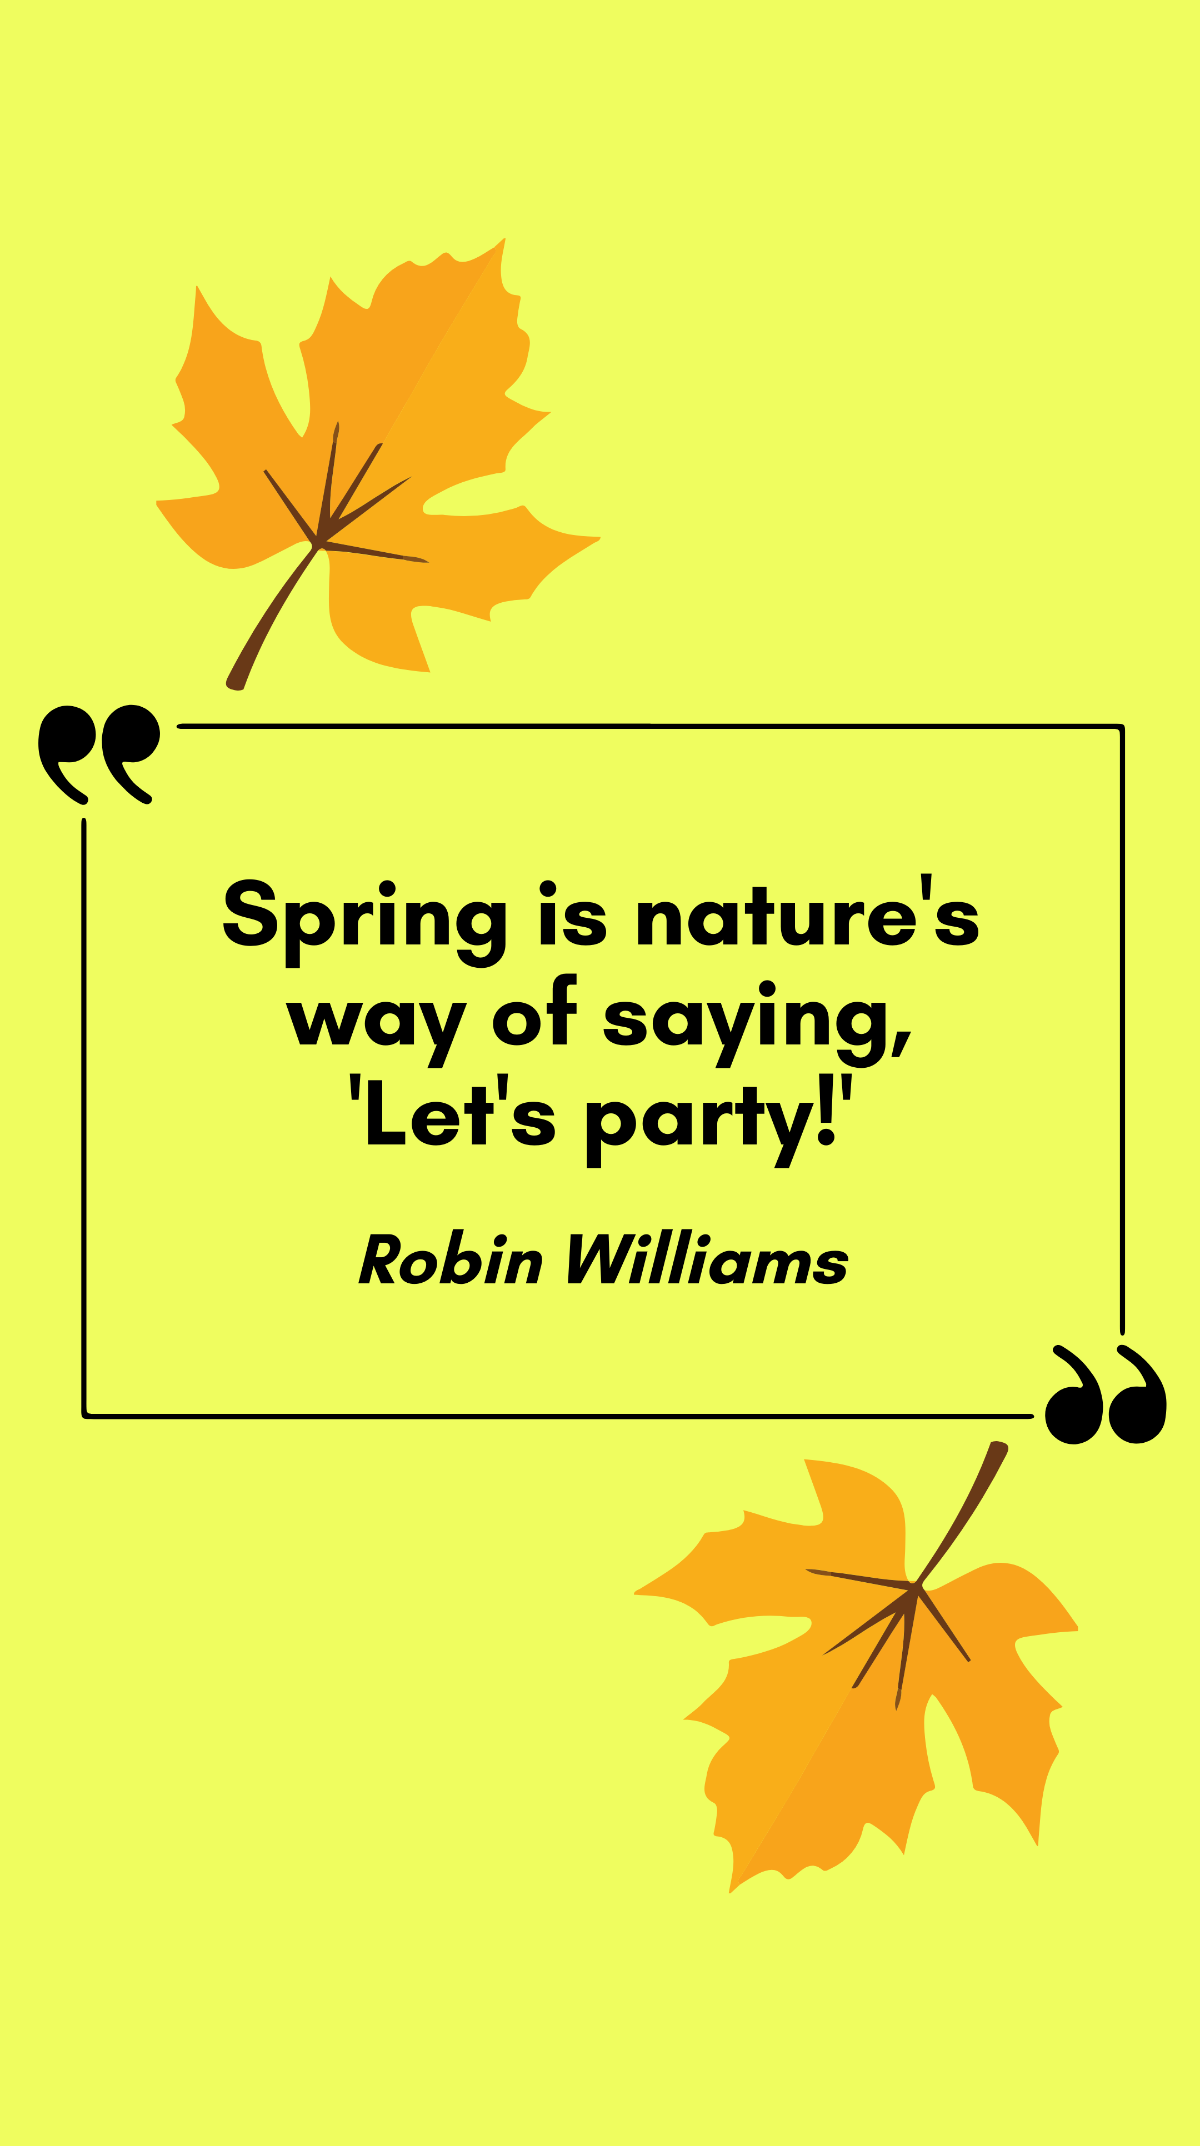 Robin Williams - Spring is nature's way of saying, 'Let's party!'